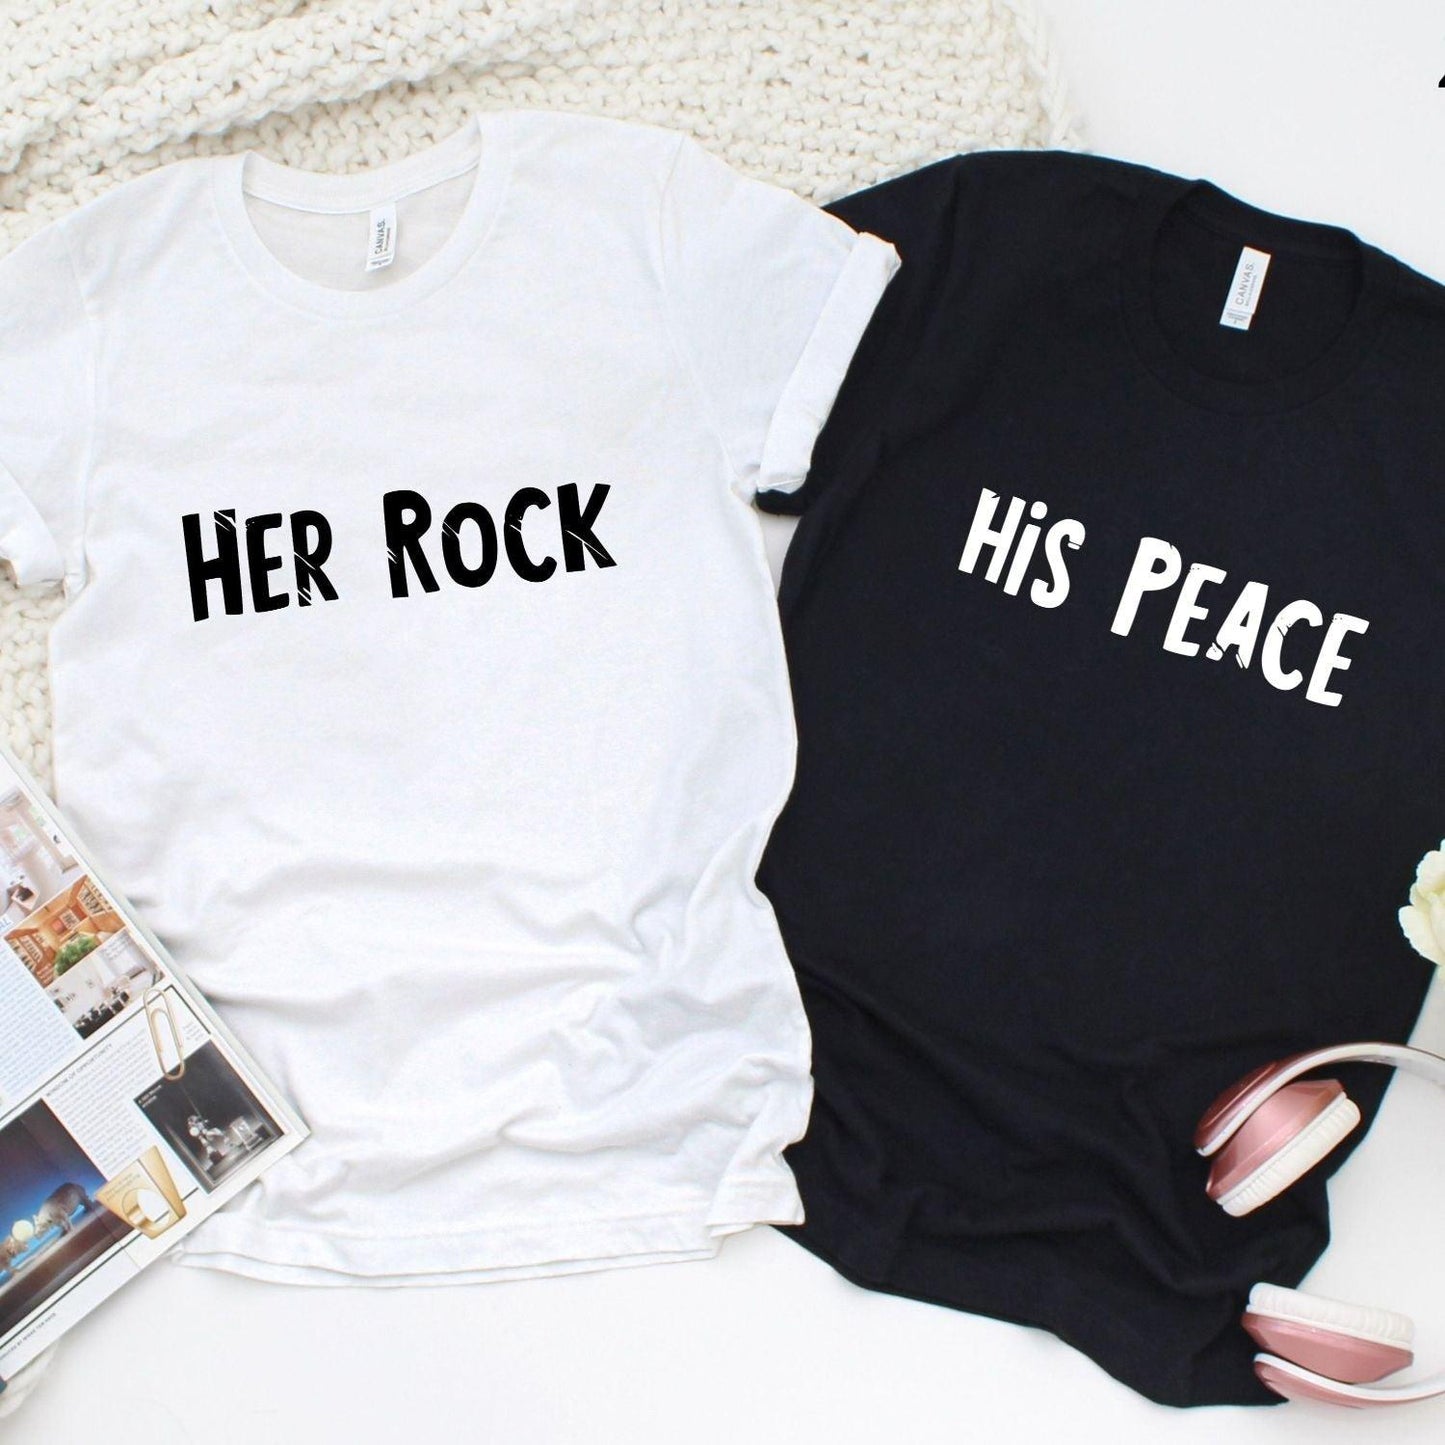 Matching Set: His Rock & Her Peace Sweatshirts - Gift for Couples, Boyfriend & Girlfriend Outfit - 4Lovebirds